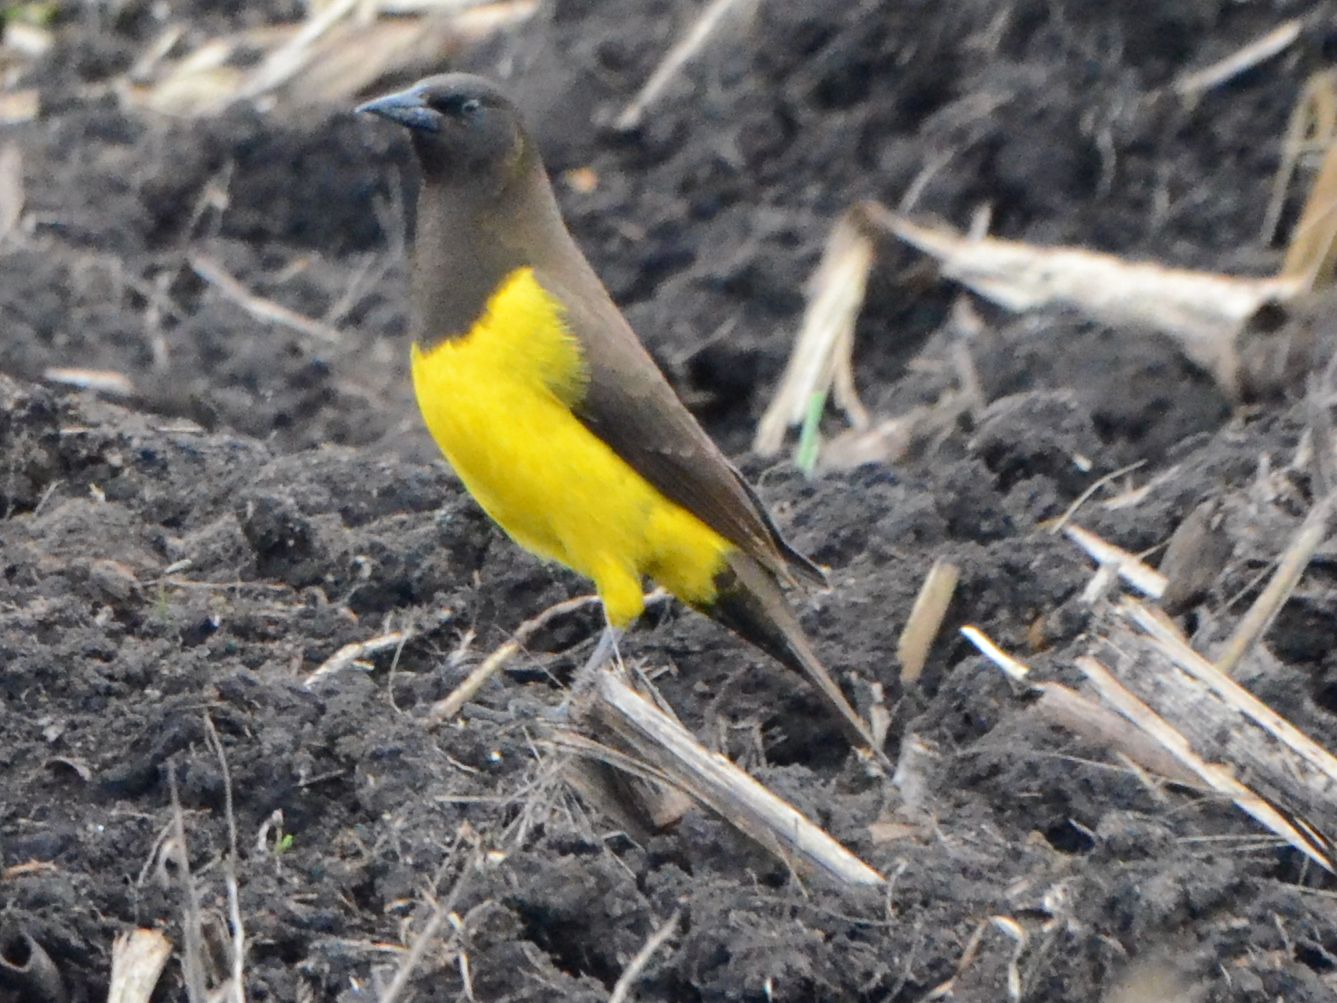 Click picture to see more Yellow-rumped Marshbirds.